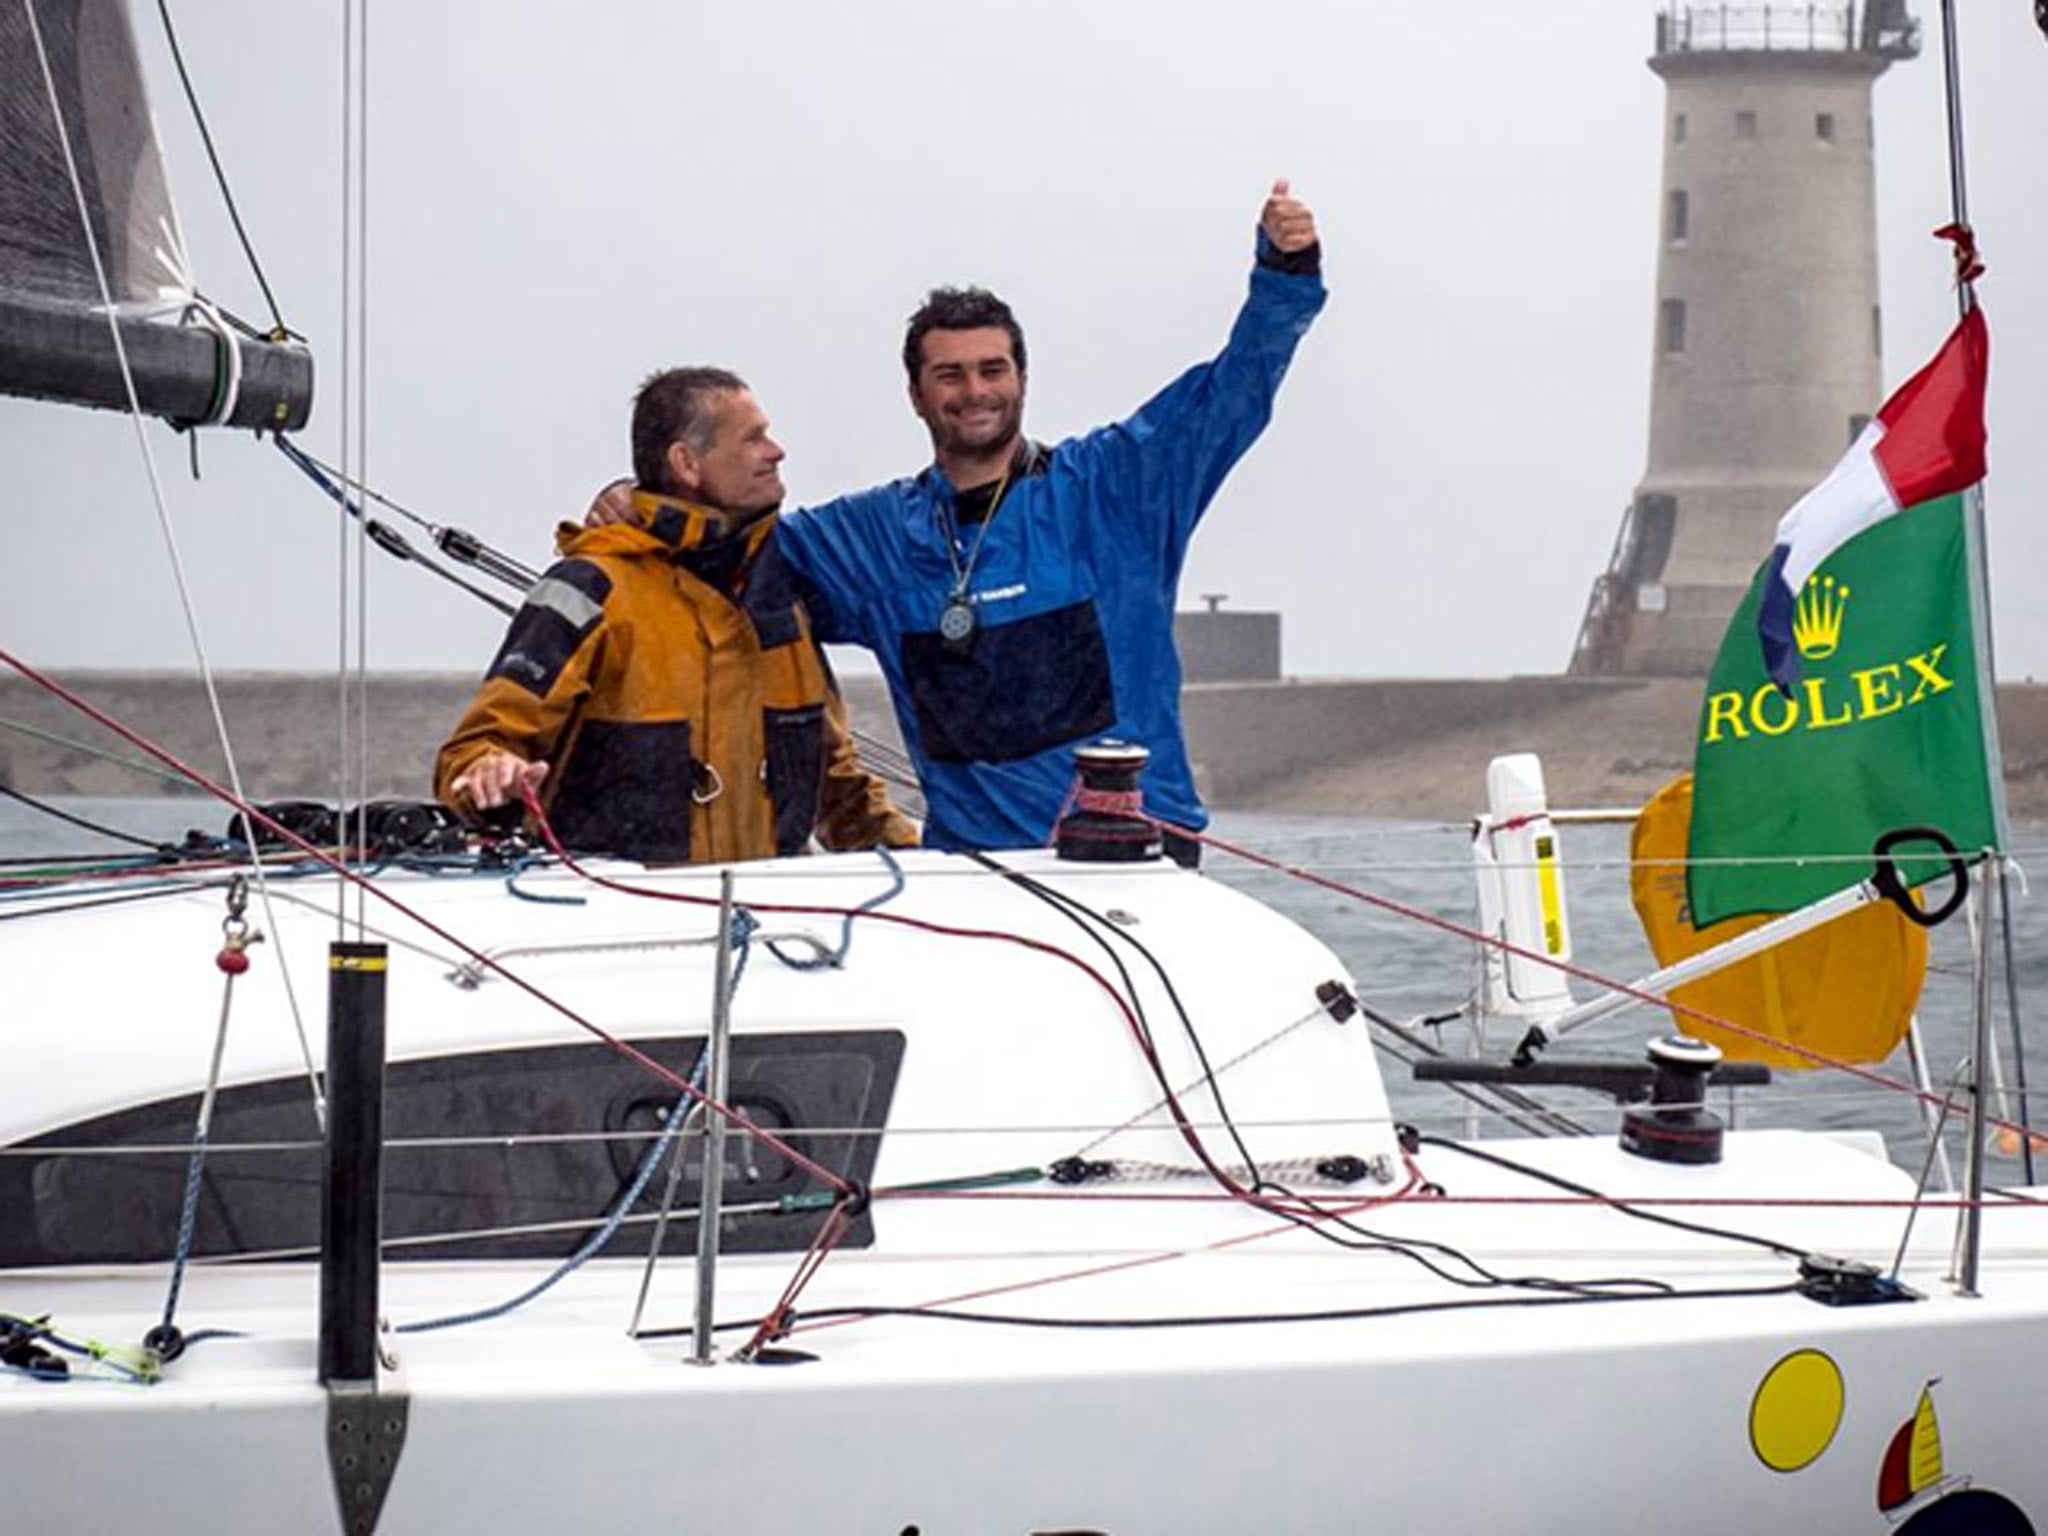 The French father and son pairing of Pascal (left) and son Alexis Loison became the first doublehanded winners in the 45th Rolex Fastnet Race in Plymouth in one of the smallest boats, the 33-foot Night and Day